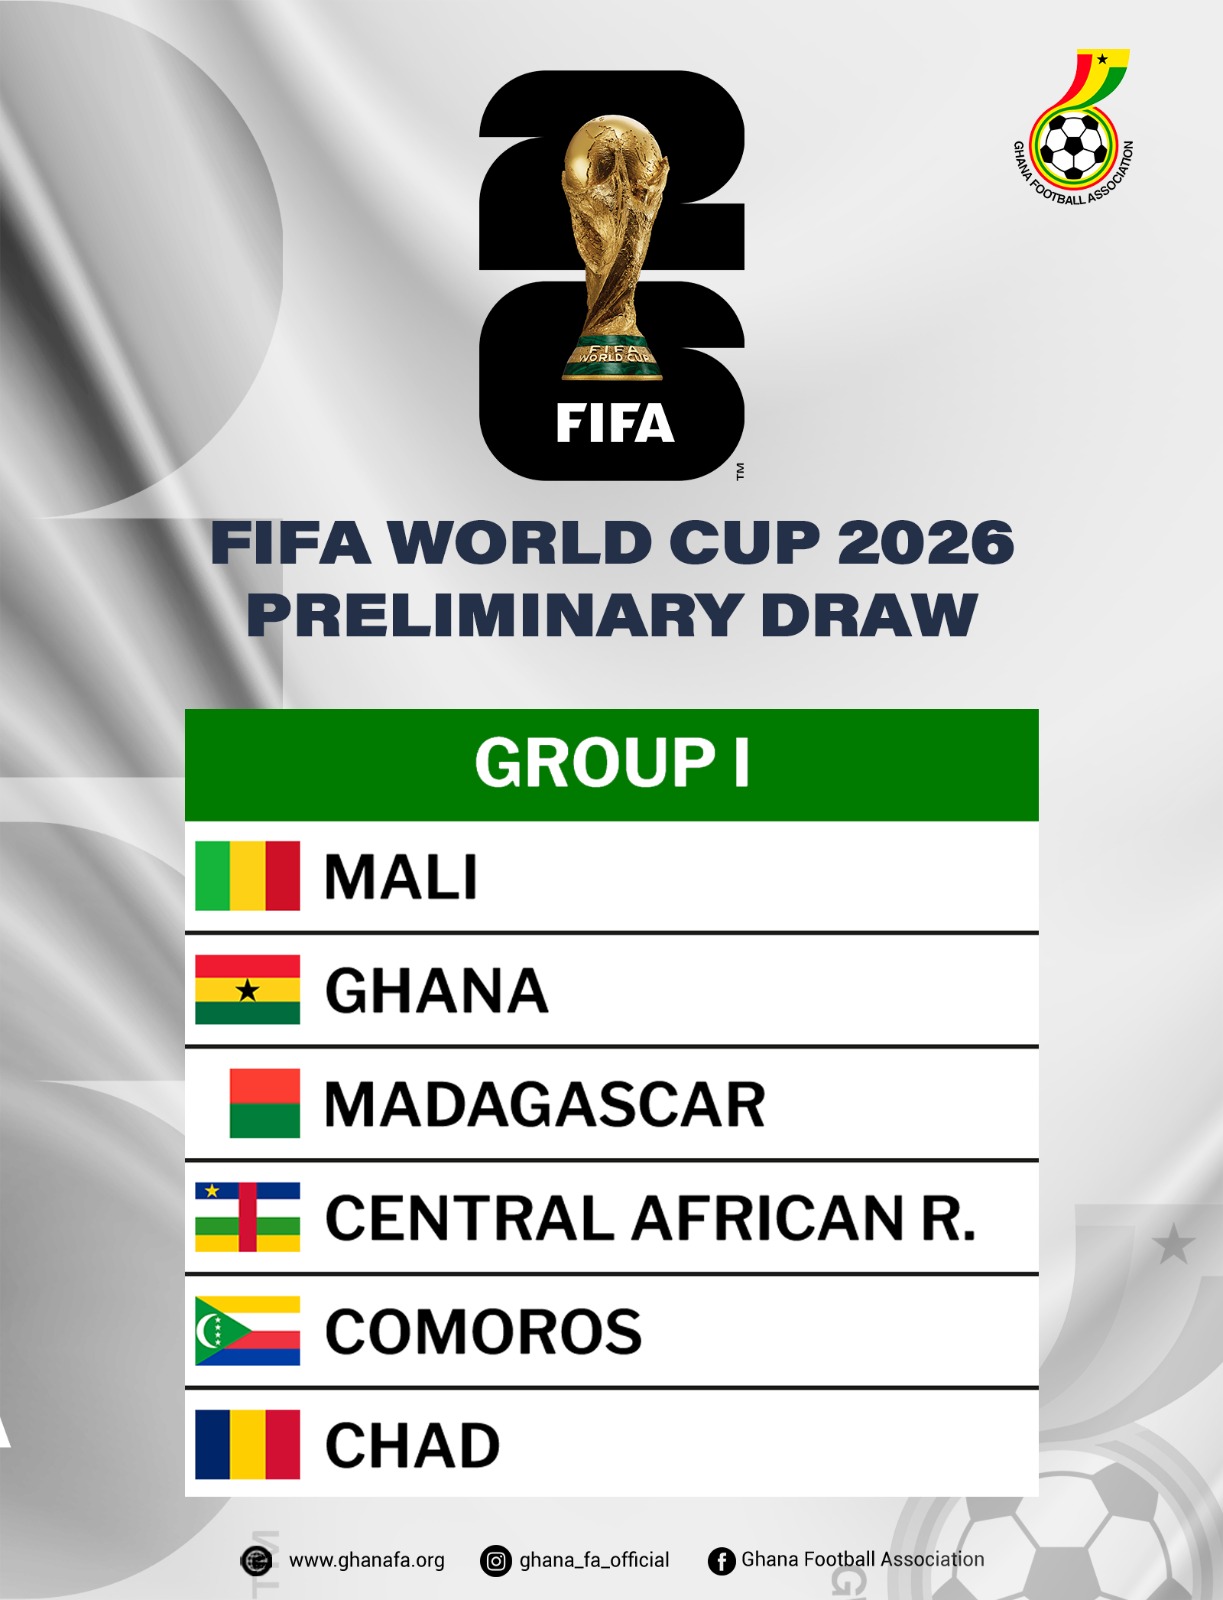 FIFA World Cup USA, Canada, Mexico 2026 qualifiers Ghana face Mali in Group I